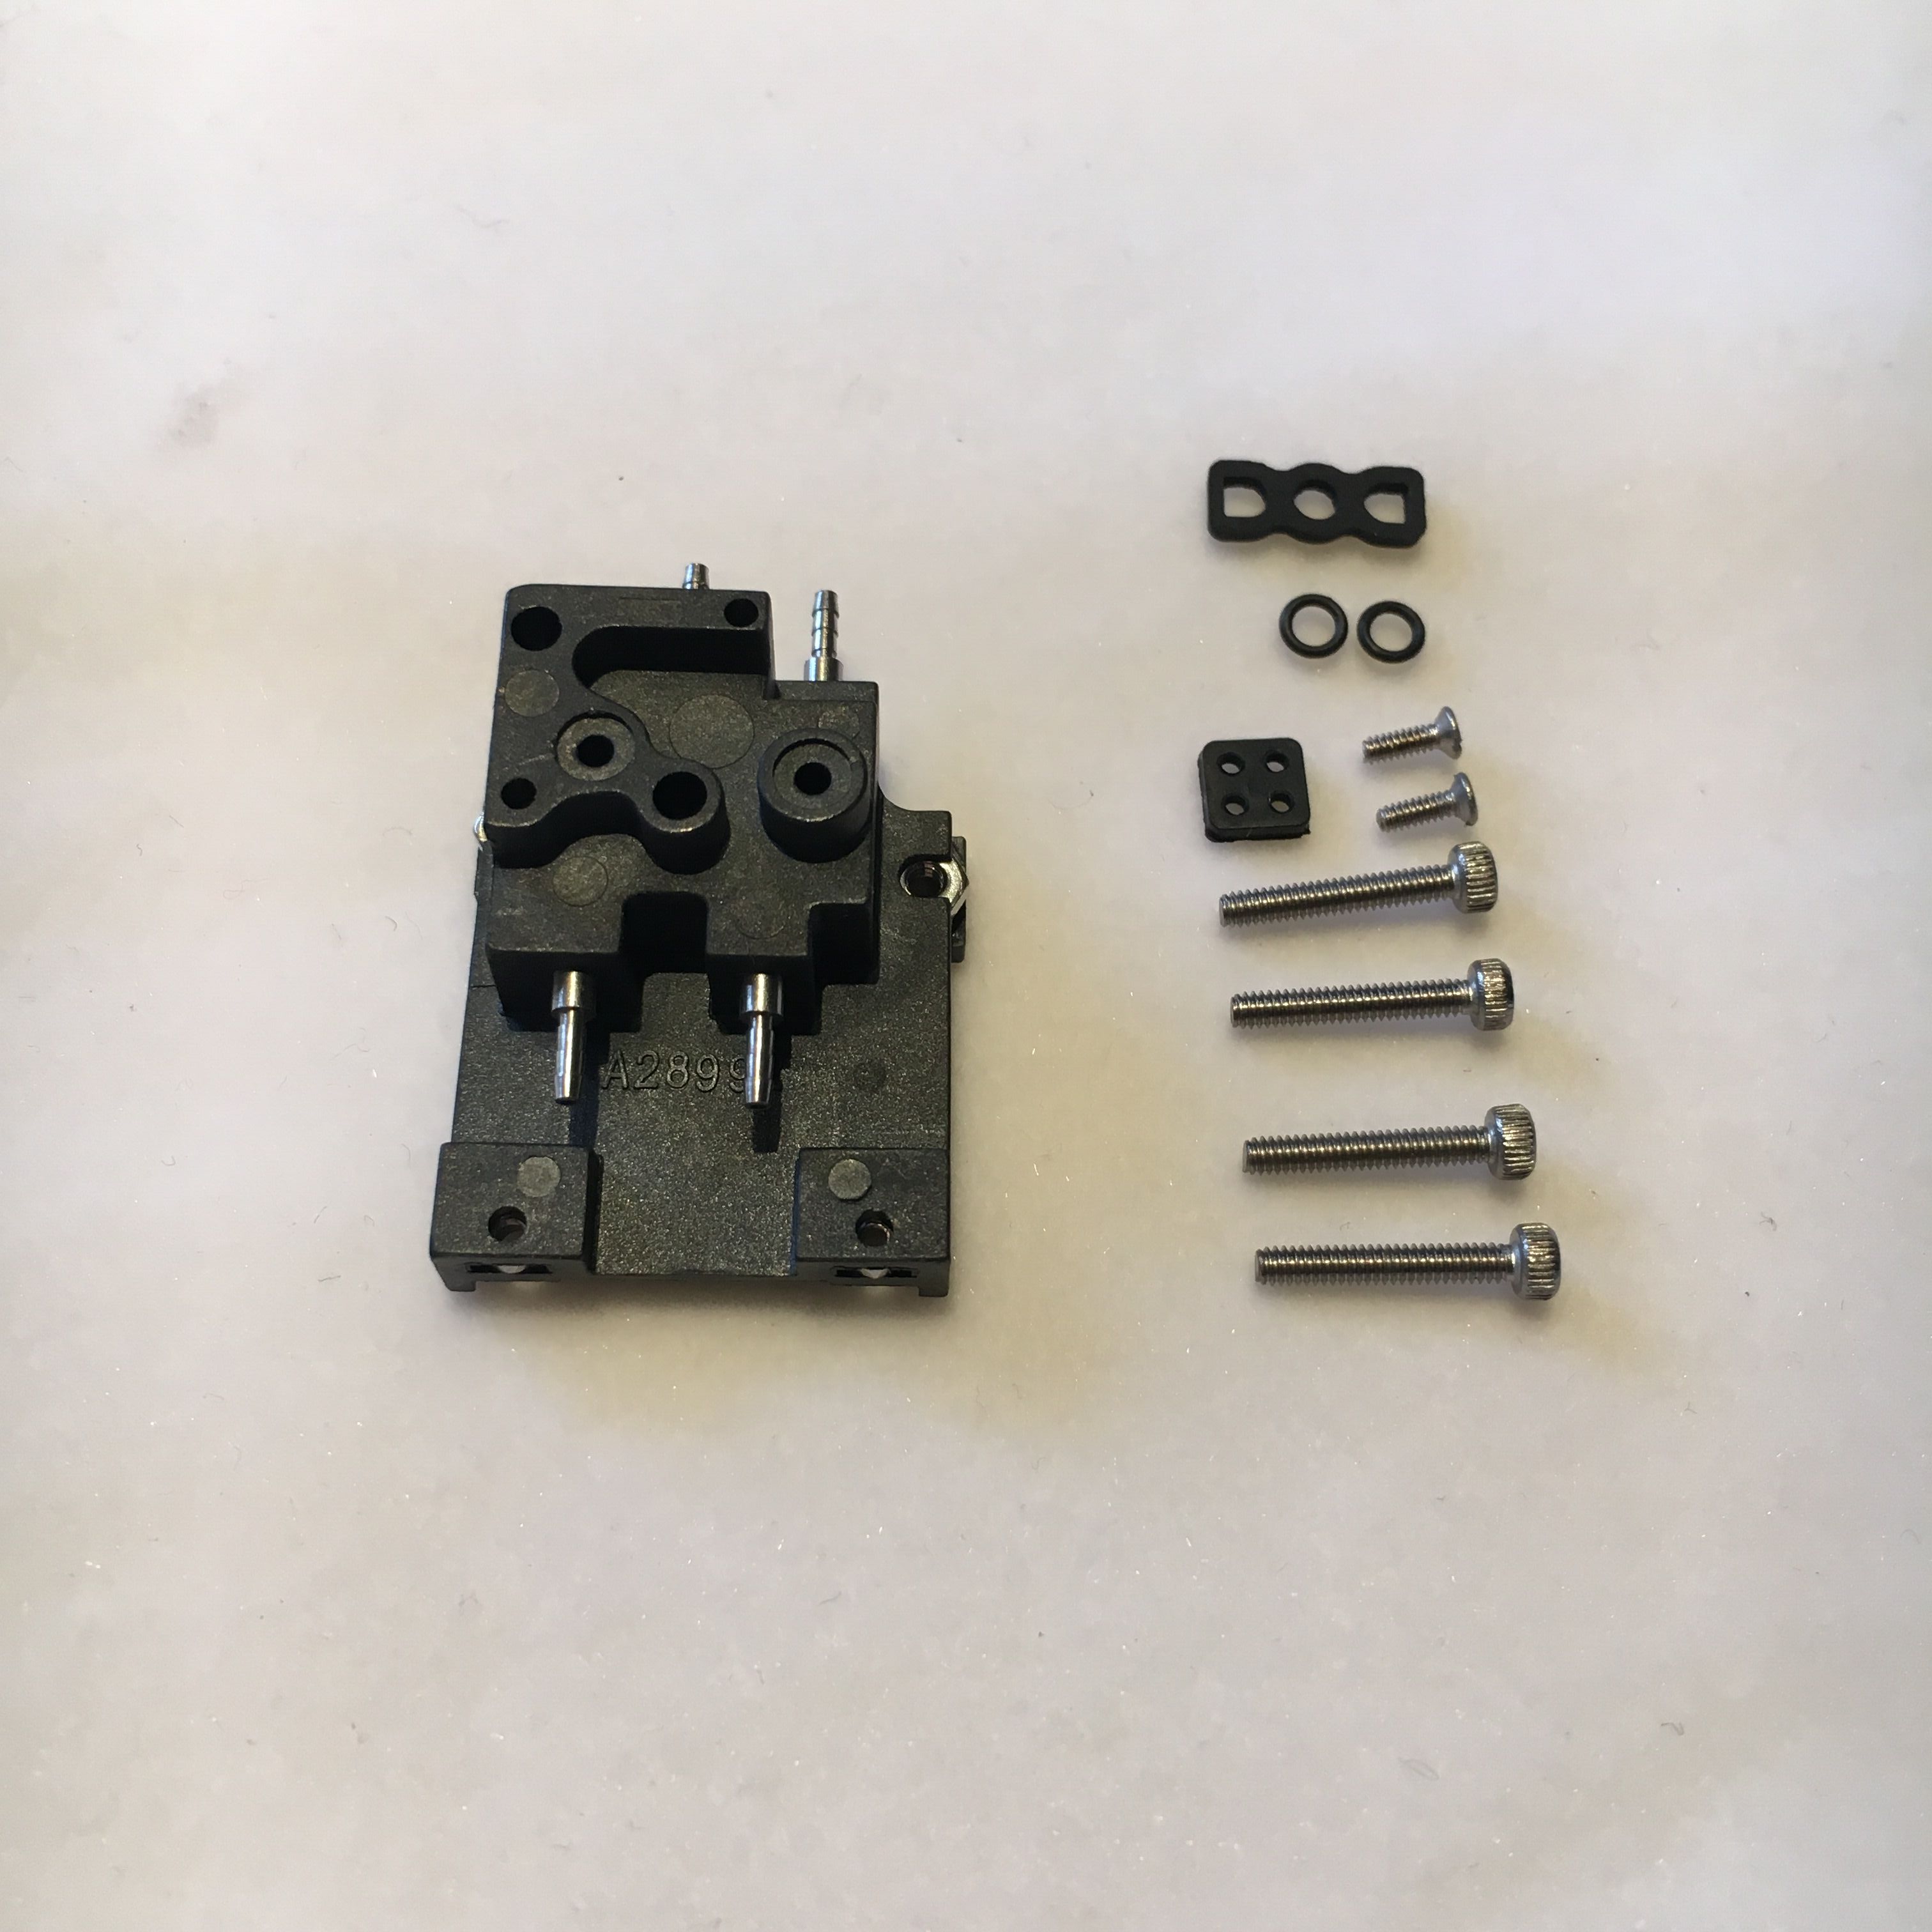 Details about   Electrical Supply Single Valve Printhead D3500-507-00 